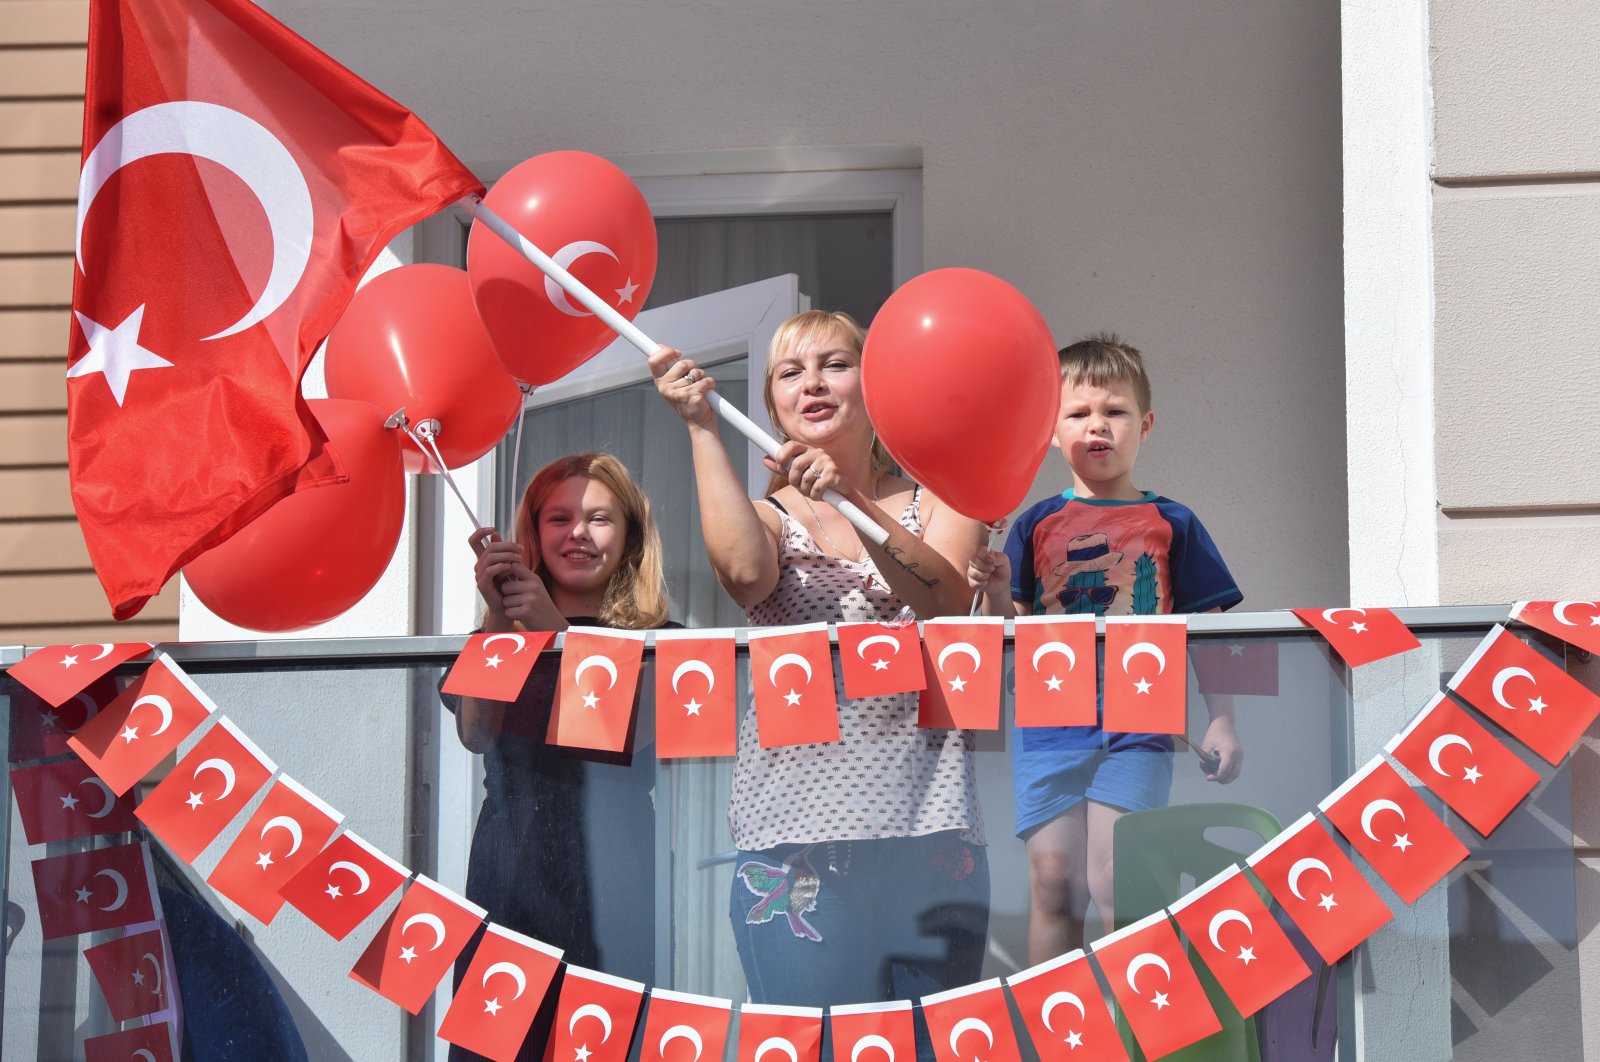 Stuck at home due to the coronavirus outbreak, families opted to celebrate Turkey's Children Day on their balconies. (DHA Photo)